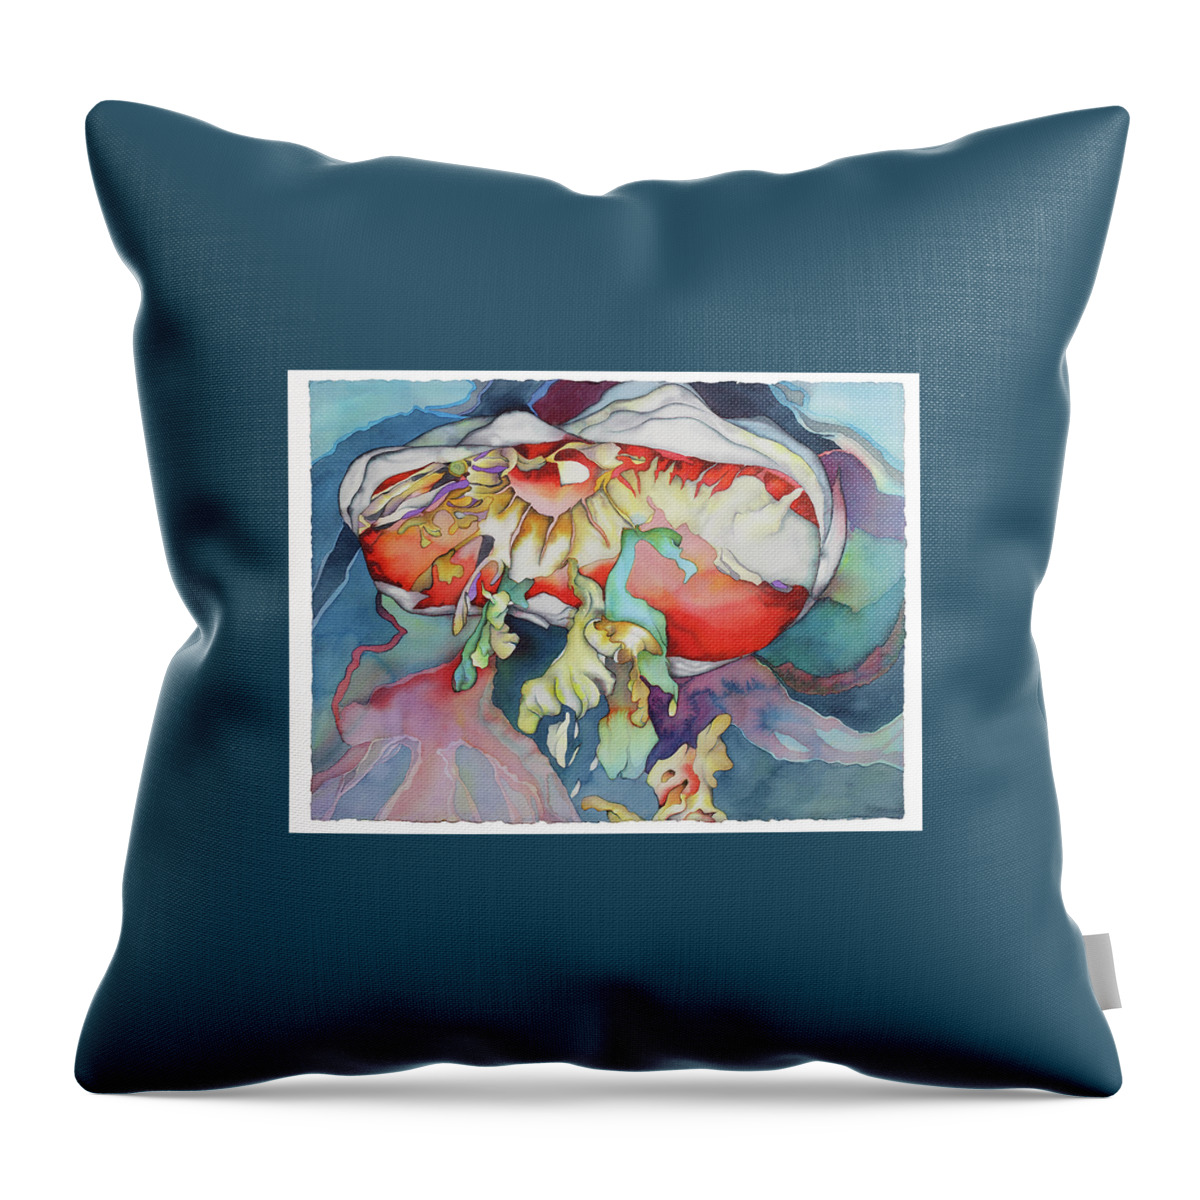 Ocean Throw Pillow featuring the painting The hiding place by Liduine Bekman